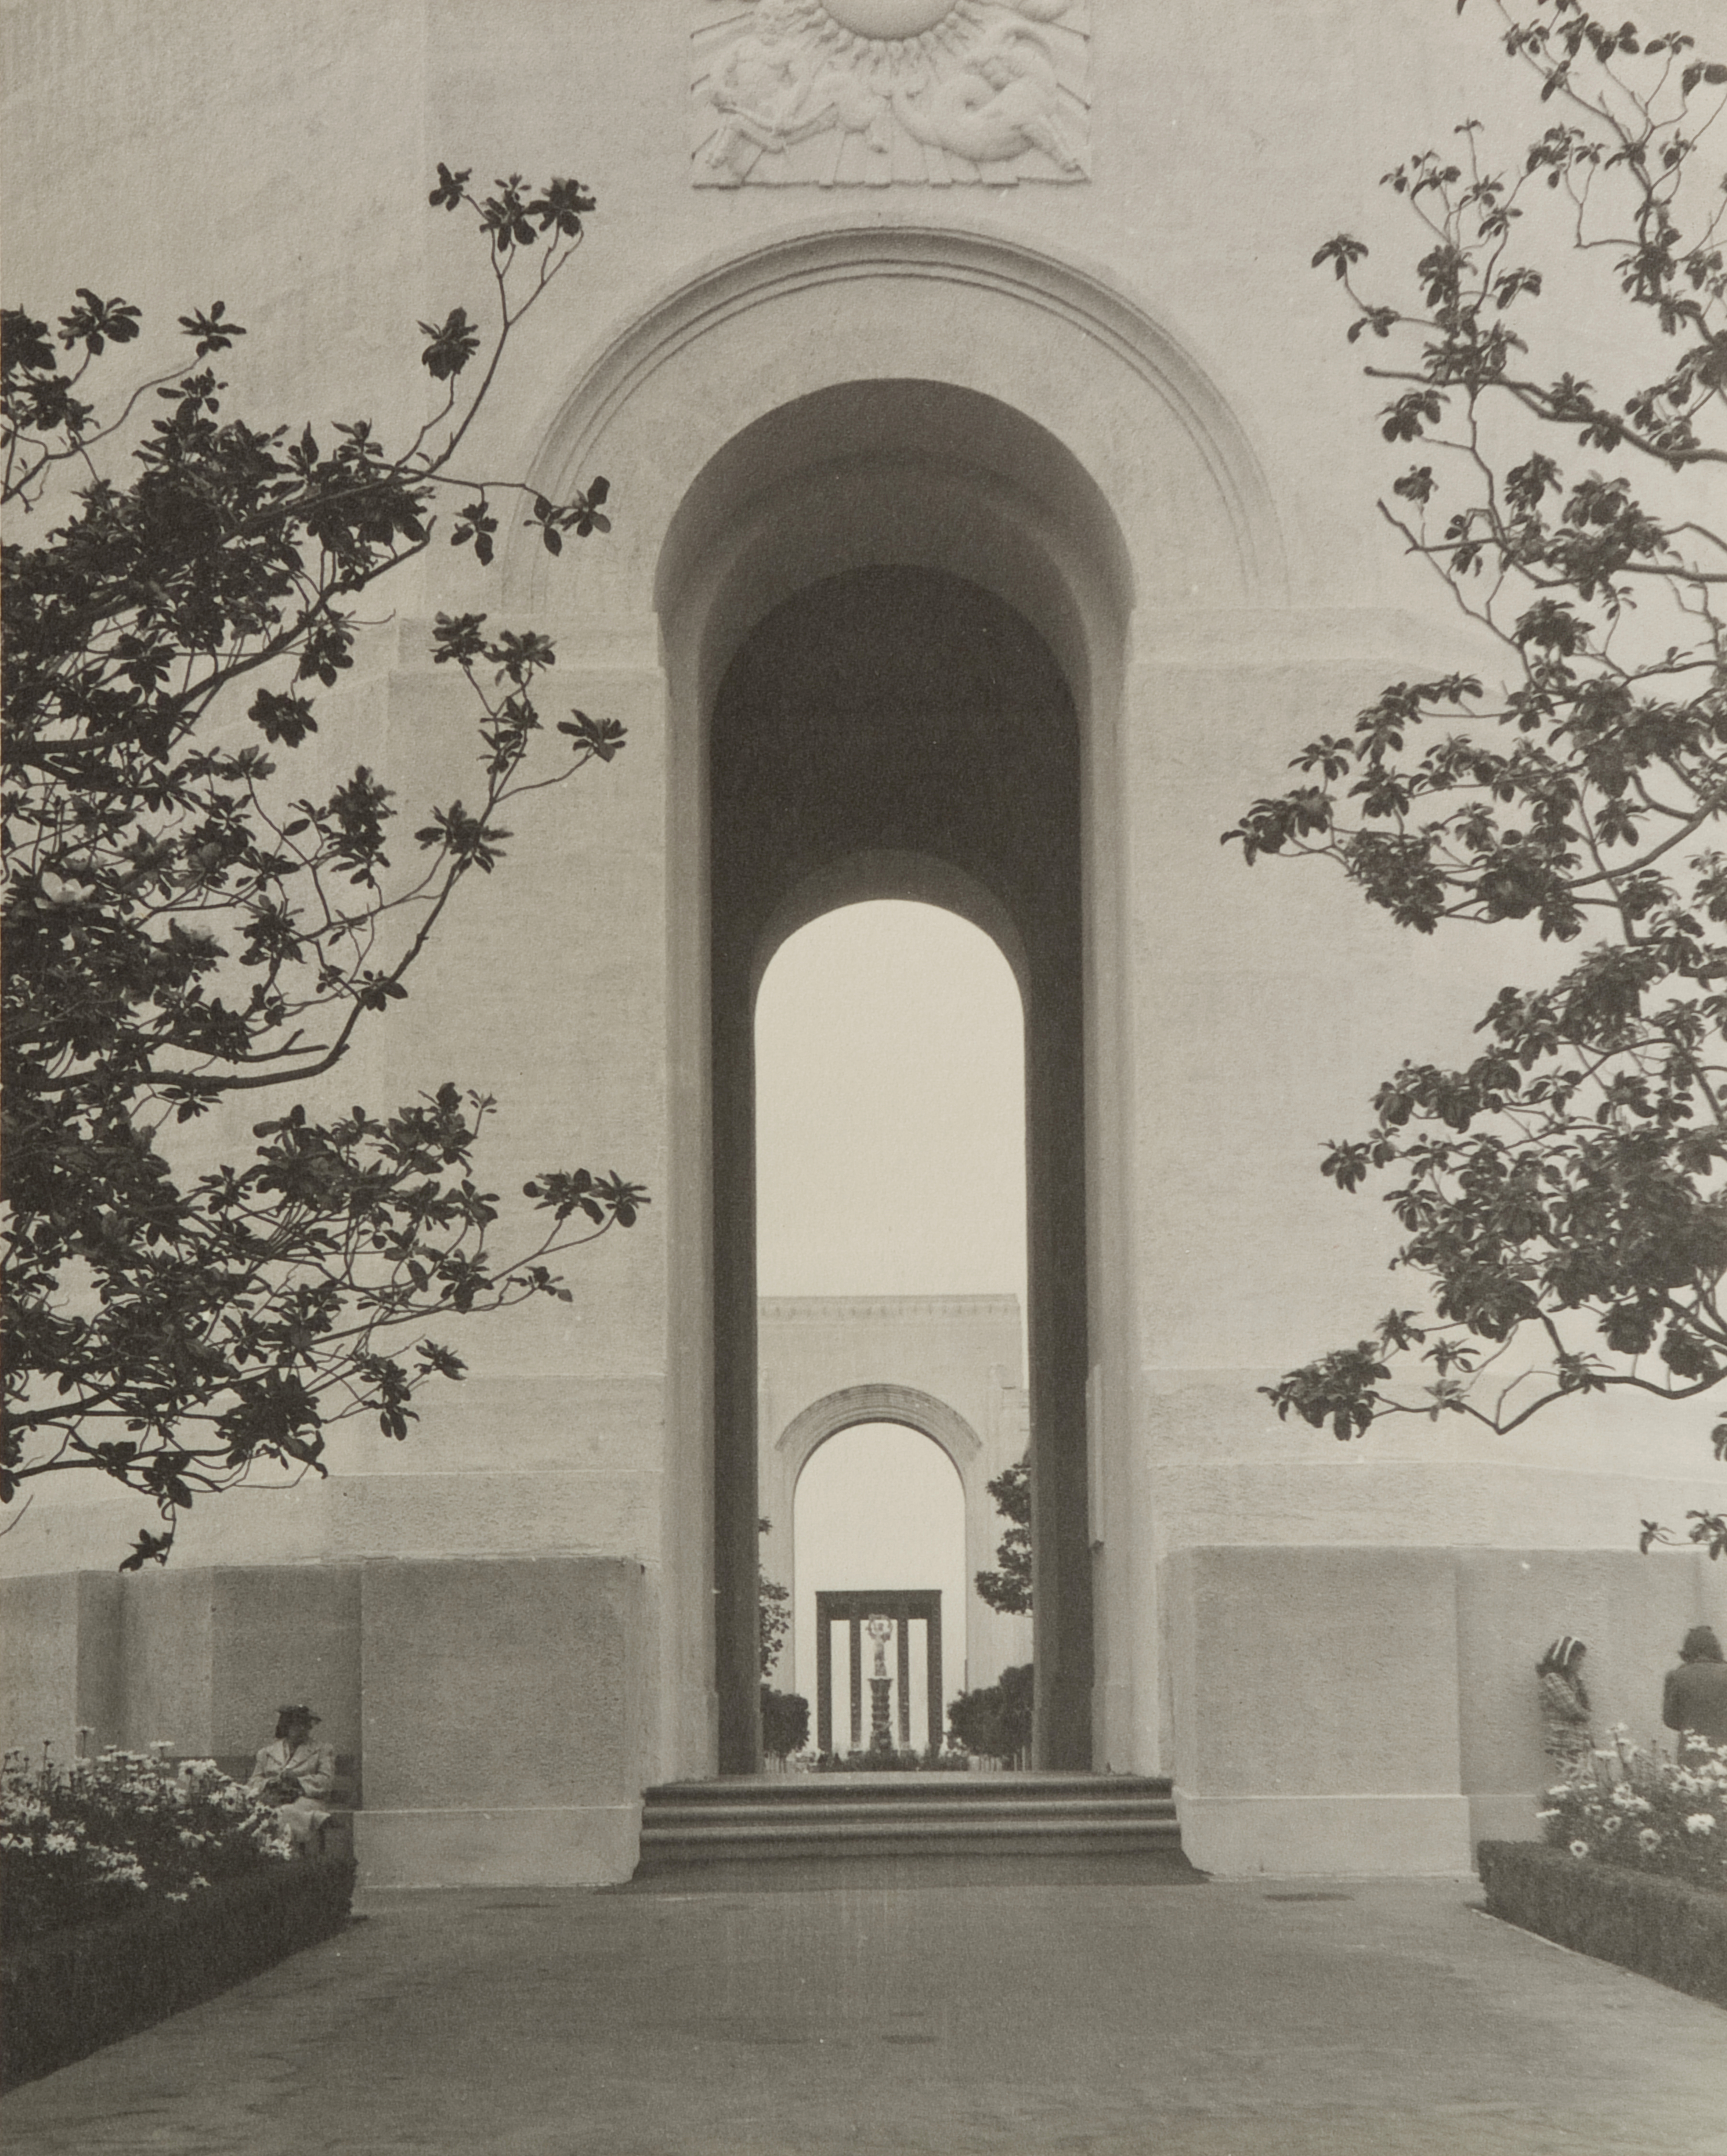 View of entrance to San Francisco Golden Gate International Exposition, Treasure